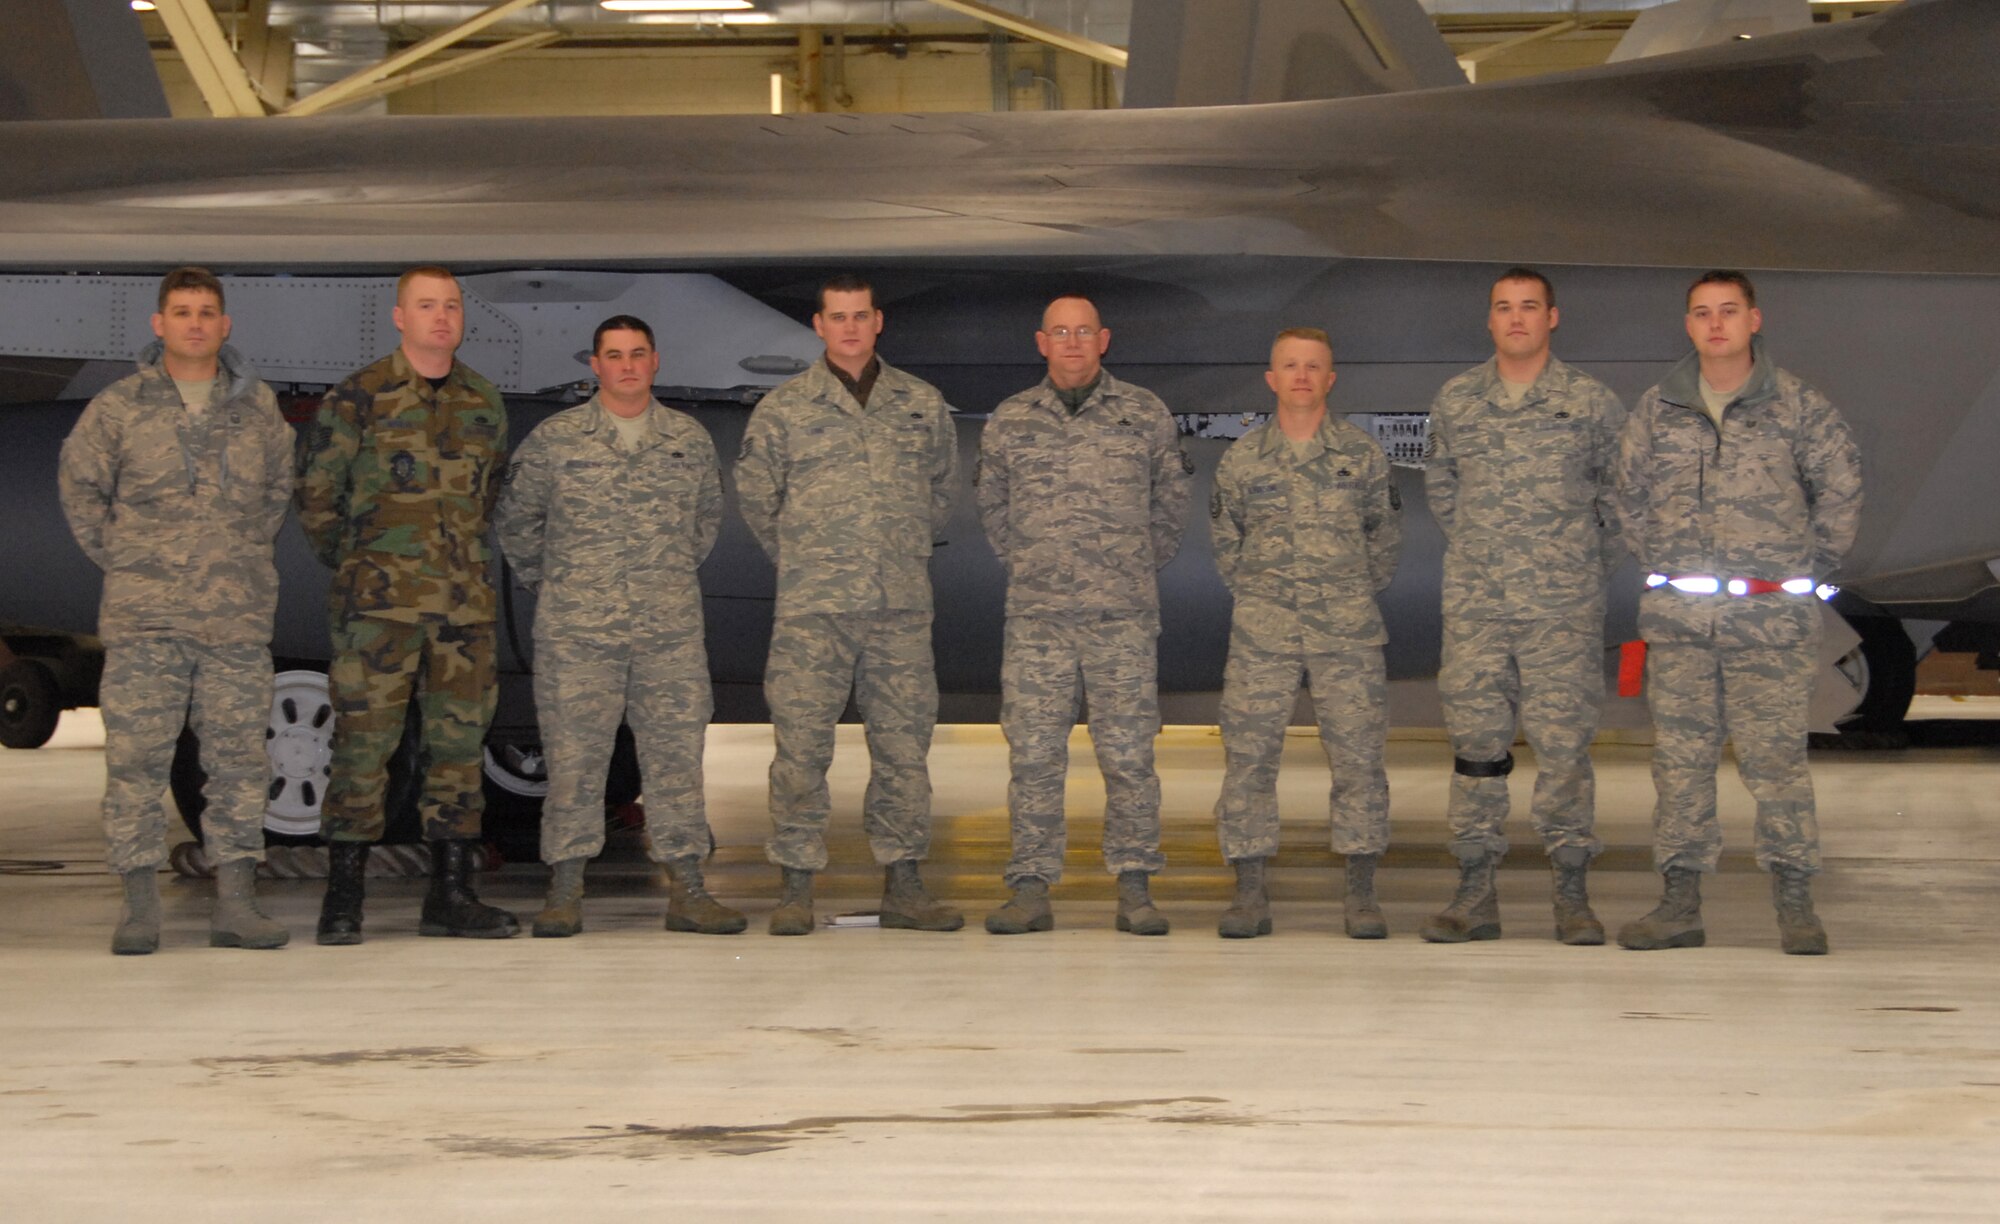 The 477th Fighter Group, Air Force Reserve Command's first F-22A Raptor unit, deployed six maintainers and two weapons loaders to Anderson Air Base, Guam.  They deployed in support of.the 3rd Wing's theater security package supporting U.S. Pacific Command objectives in the Western Pacific, Friday, Jan 9, 2009. A total of eight Reserve pilots are also scheduled to join the tasking efforts over the course of the deployment.  The 477th FG is a Classic Associate unit responsible for recruiting, training, developing and retaining unrivaled Citizen Airmen to support 3rd Wing and Expeditionary Air Force mission requirements.  (US Air Force Photo by Capt. Torri White)
